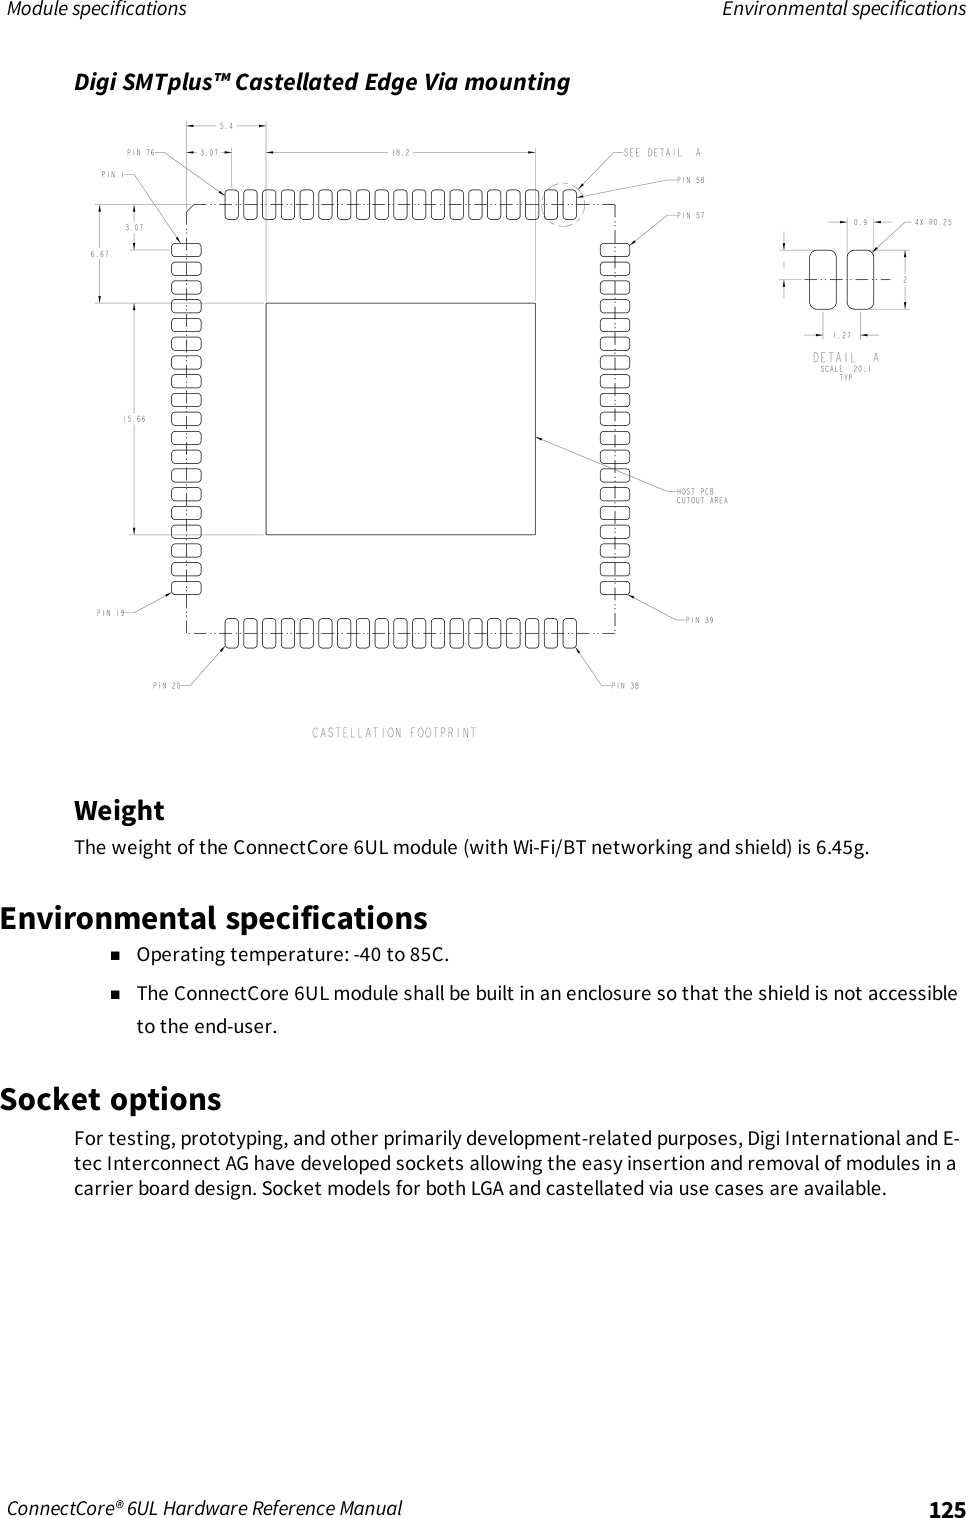 Module specifications Environmental specificationsConnectCore® 6UL Hardware Reference Manual 125Digi SMTplus™ Castellated Edge Via mountingWeightThe weight of the ConnectCore 6UL module (with Wi-Fi/BT networking and shield) is 6.45g.Environmental specificationsnOperating temperature: -40 to 85C.nThe ConnectCore 6UL module shall be built in an enclosure so that the shield is not accessibleto the end-user.Socket optionsFor testing, prototyping, and other primarily development-related purposes, Digi International and E-tec Interconnect AG have developed sockets allowing the easy insertion and removal of modules in acarrier board design. Socket models for both LGA and castellated via use cases are available.